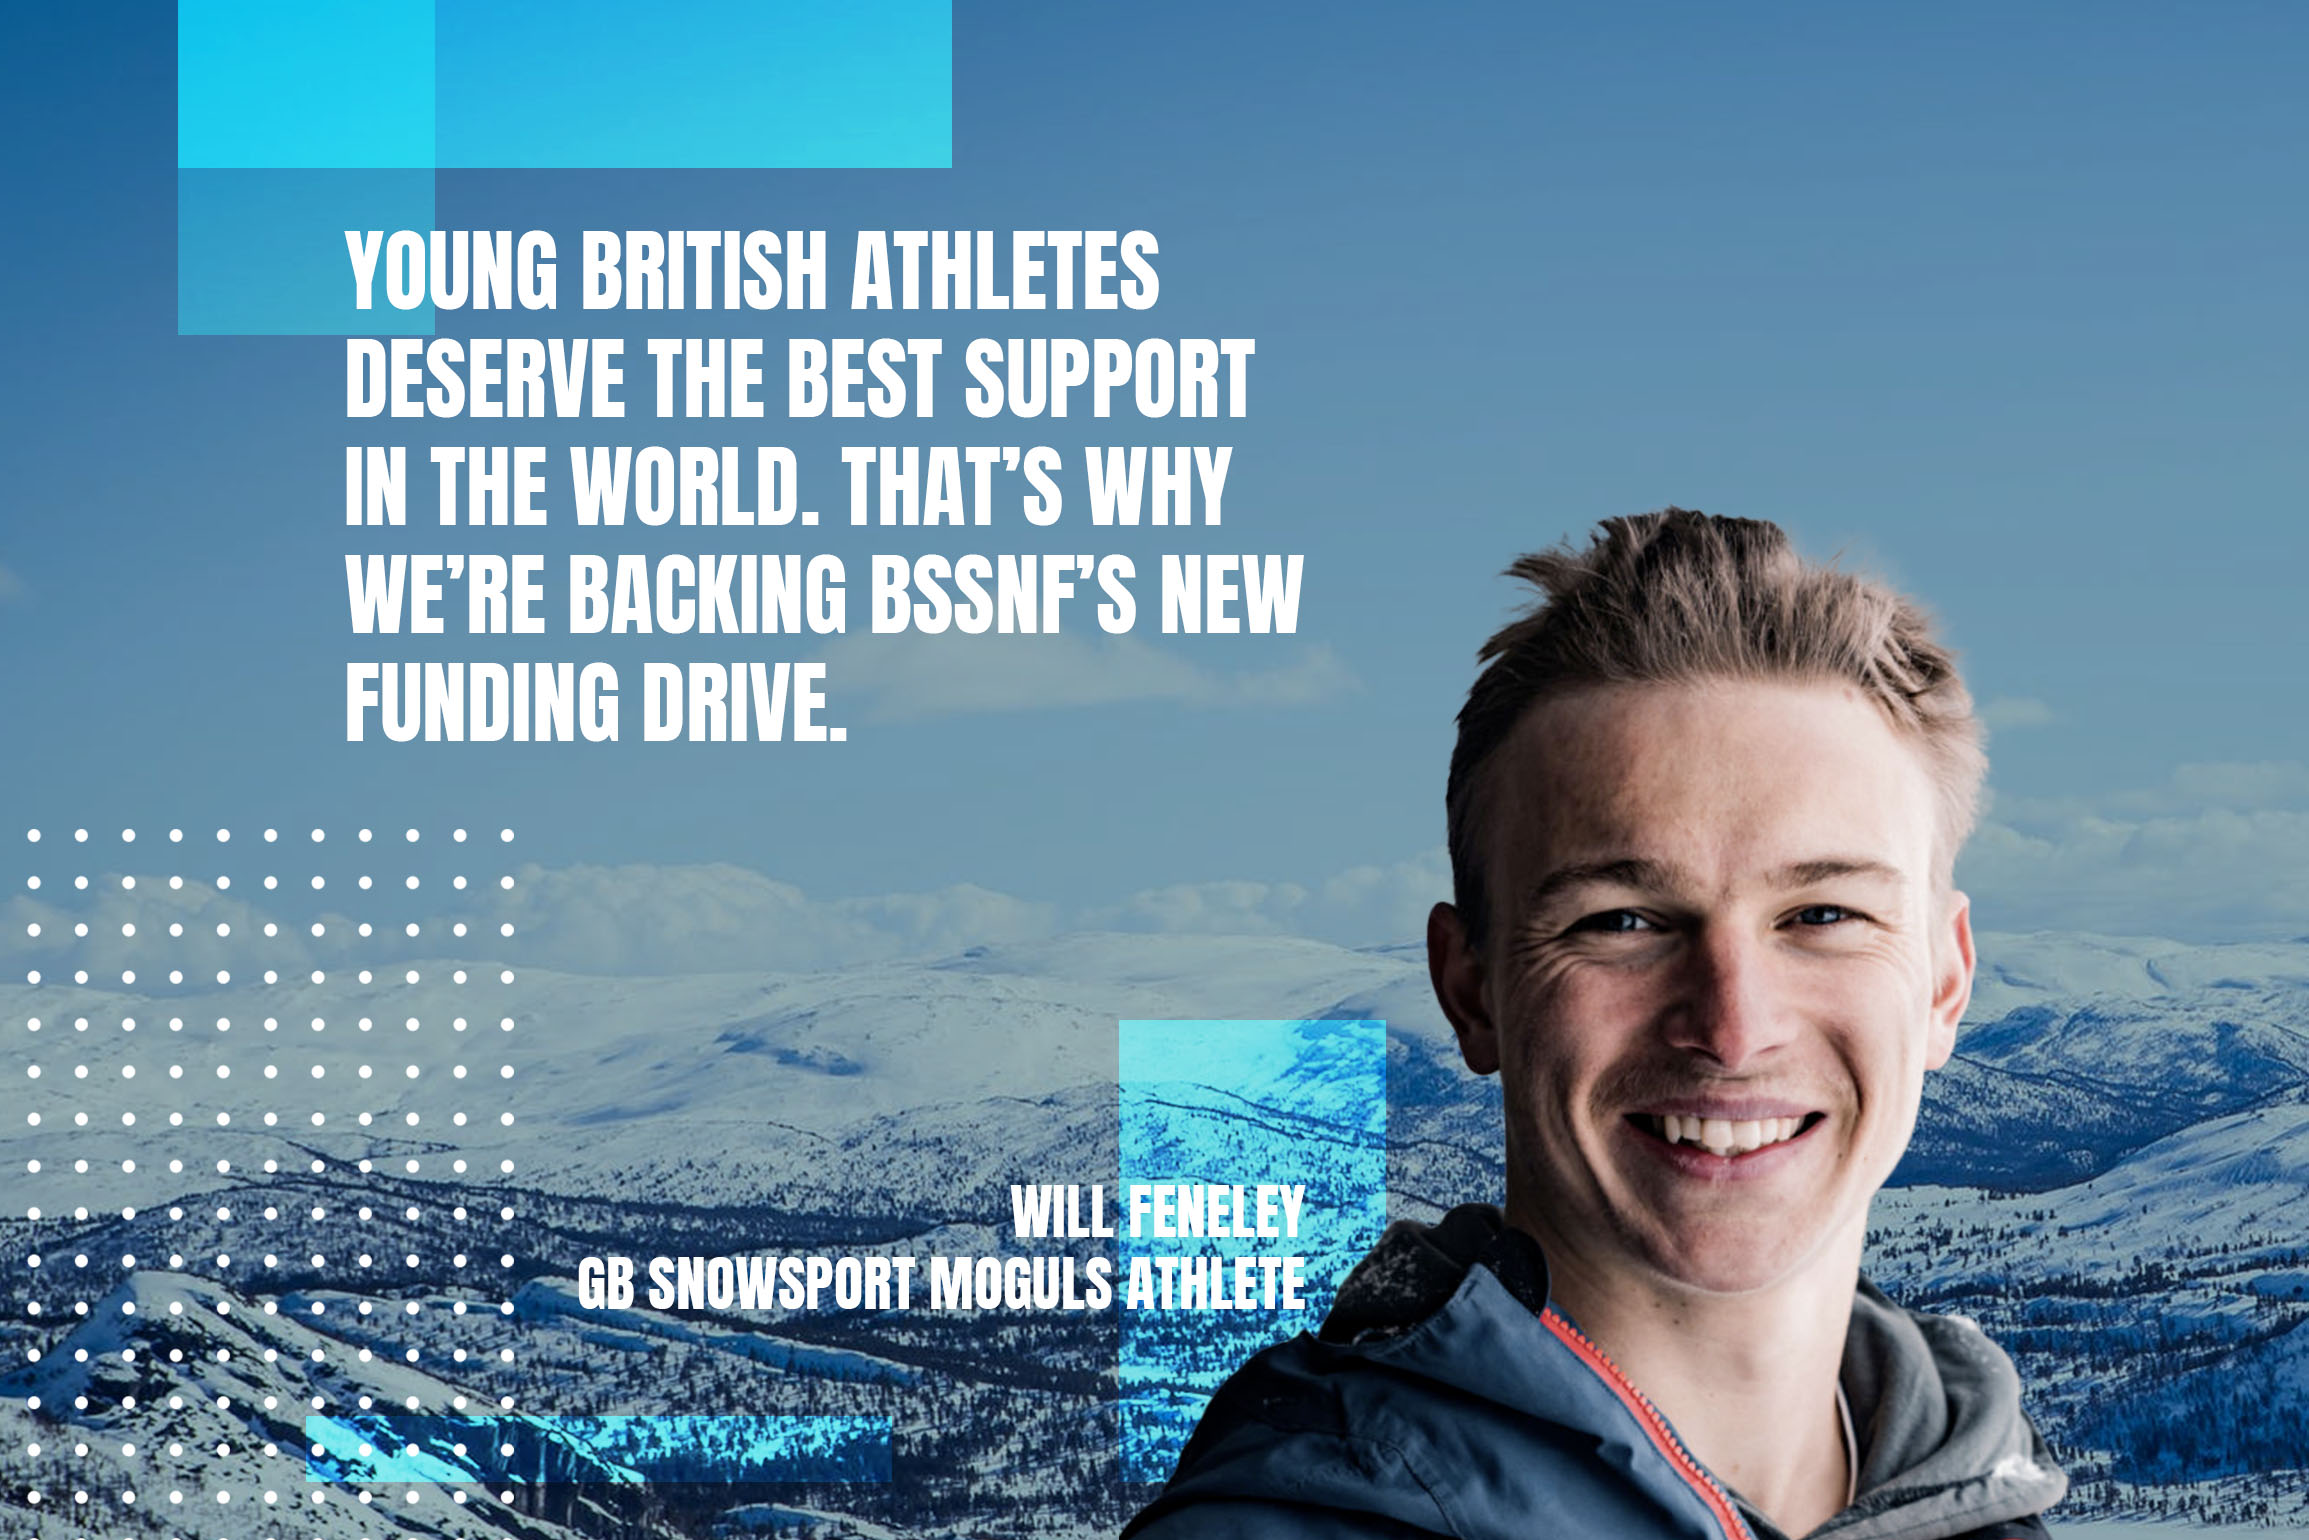 Young British athletes deserve the best support in the world. That’s why we’re backing BSSNF’s new funding drive.